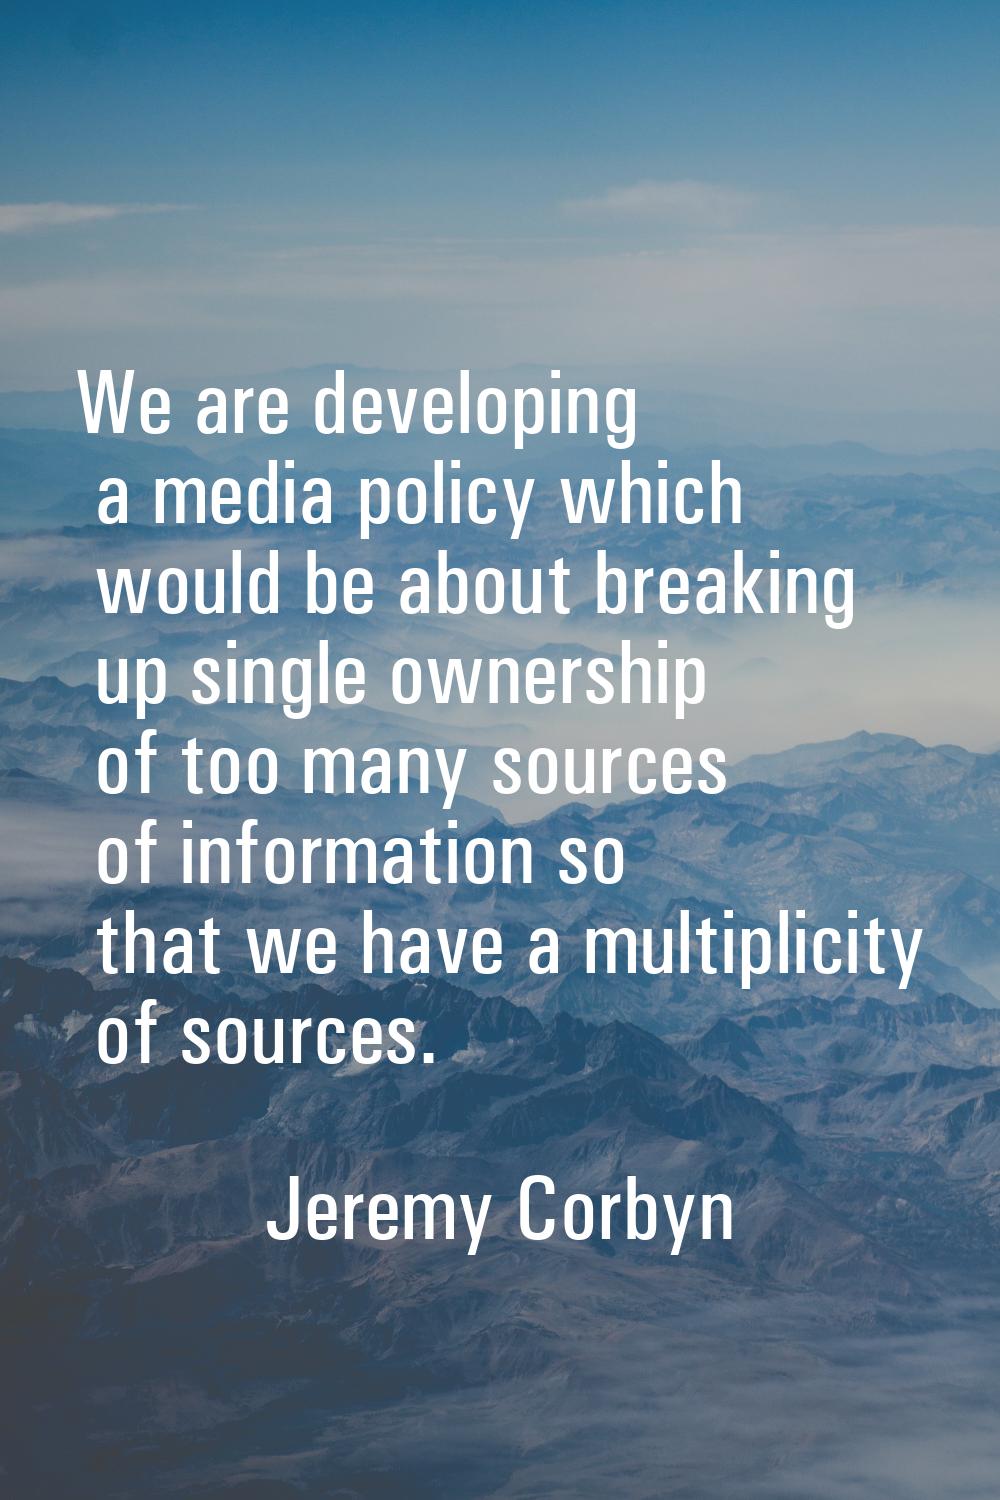 We are developing a media policy which would be about breaking up single ownership of too many sour